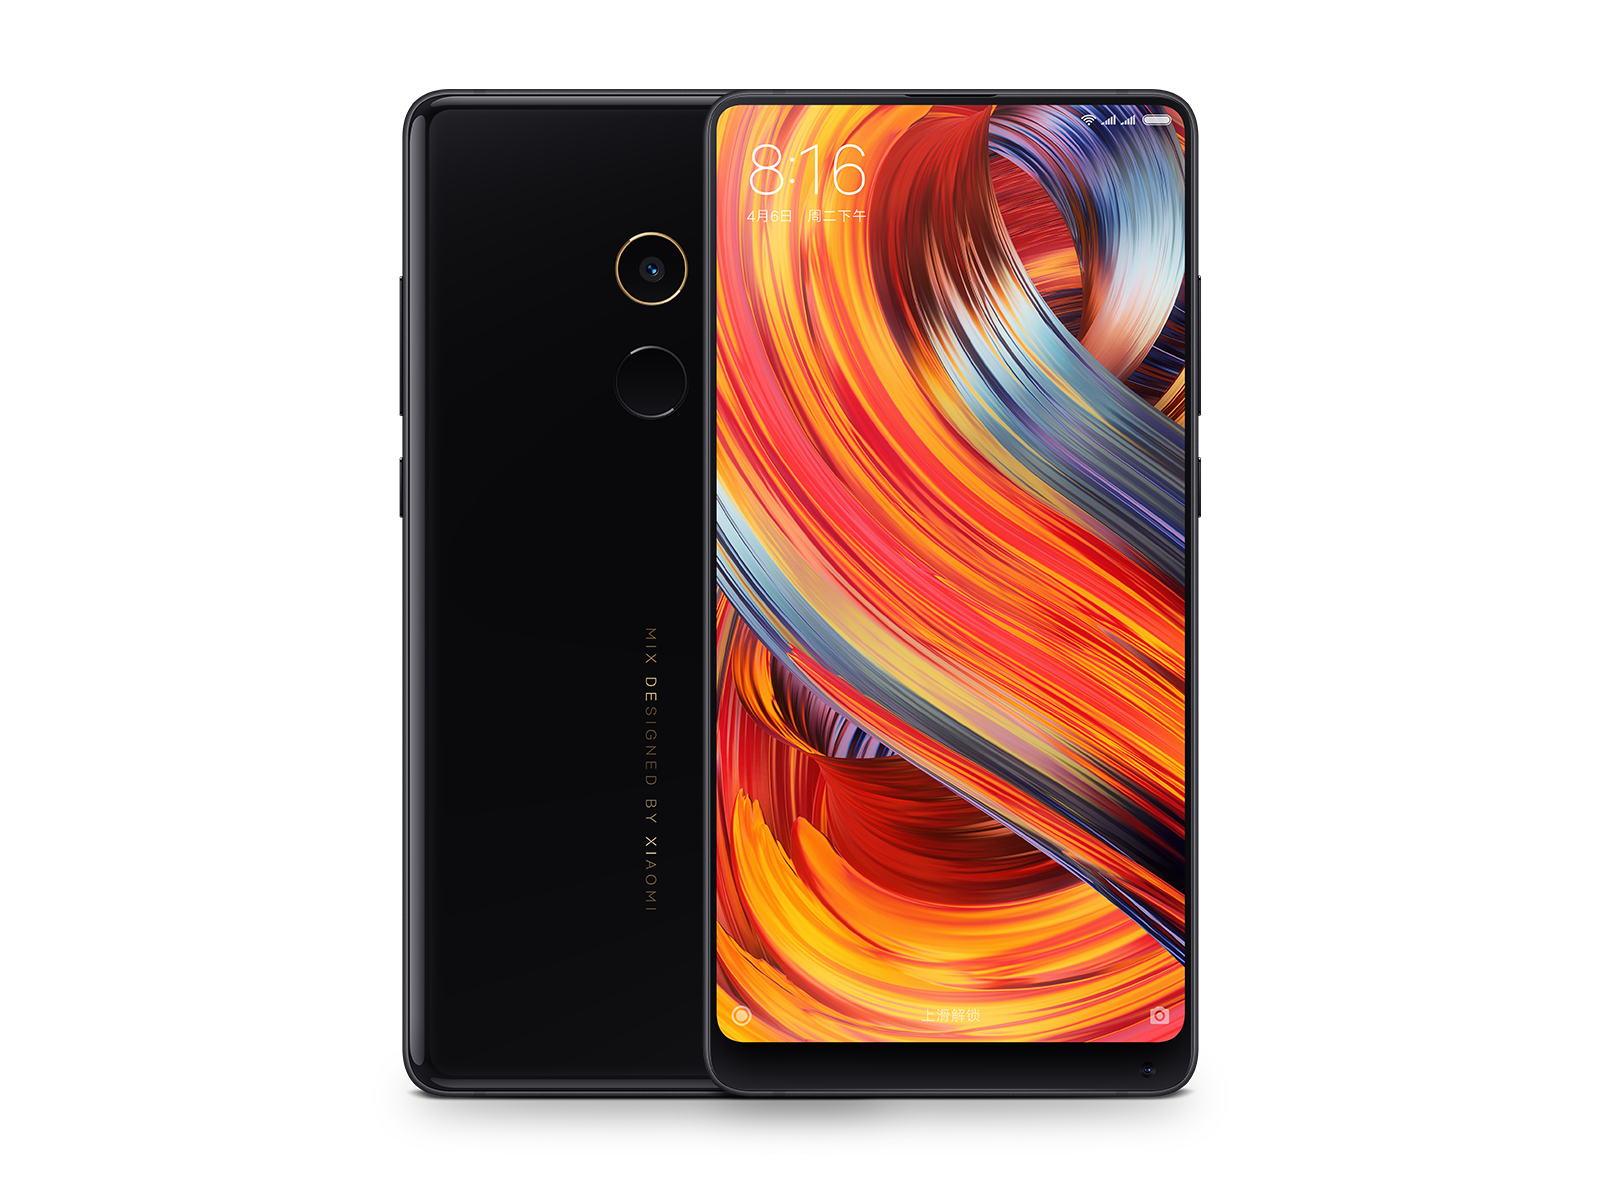 Xiaomi's Mi Mix 2 is a bezel-free, Snapdragon 835-powered handset that starts at $500